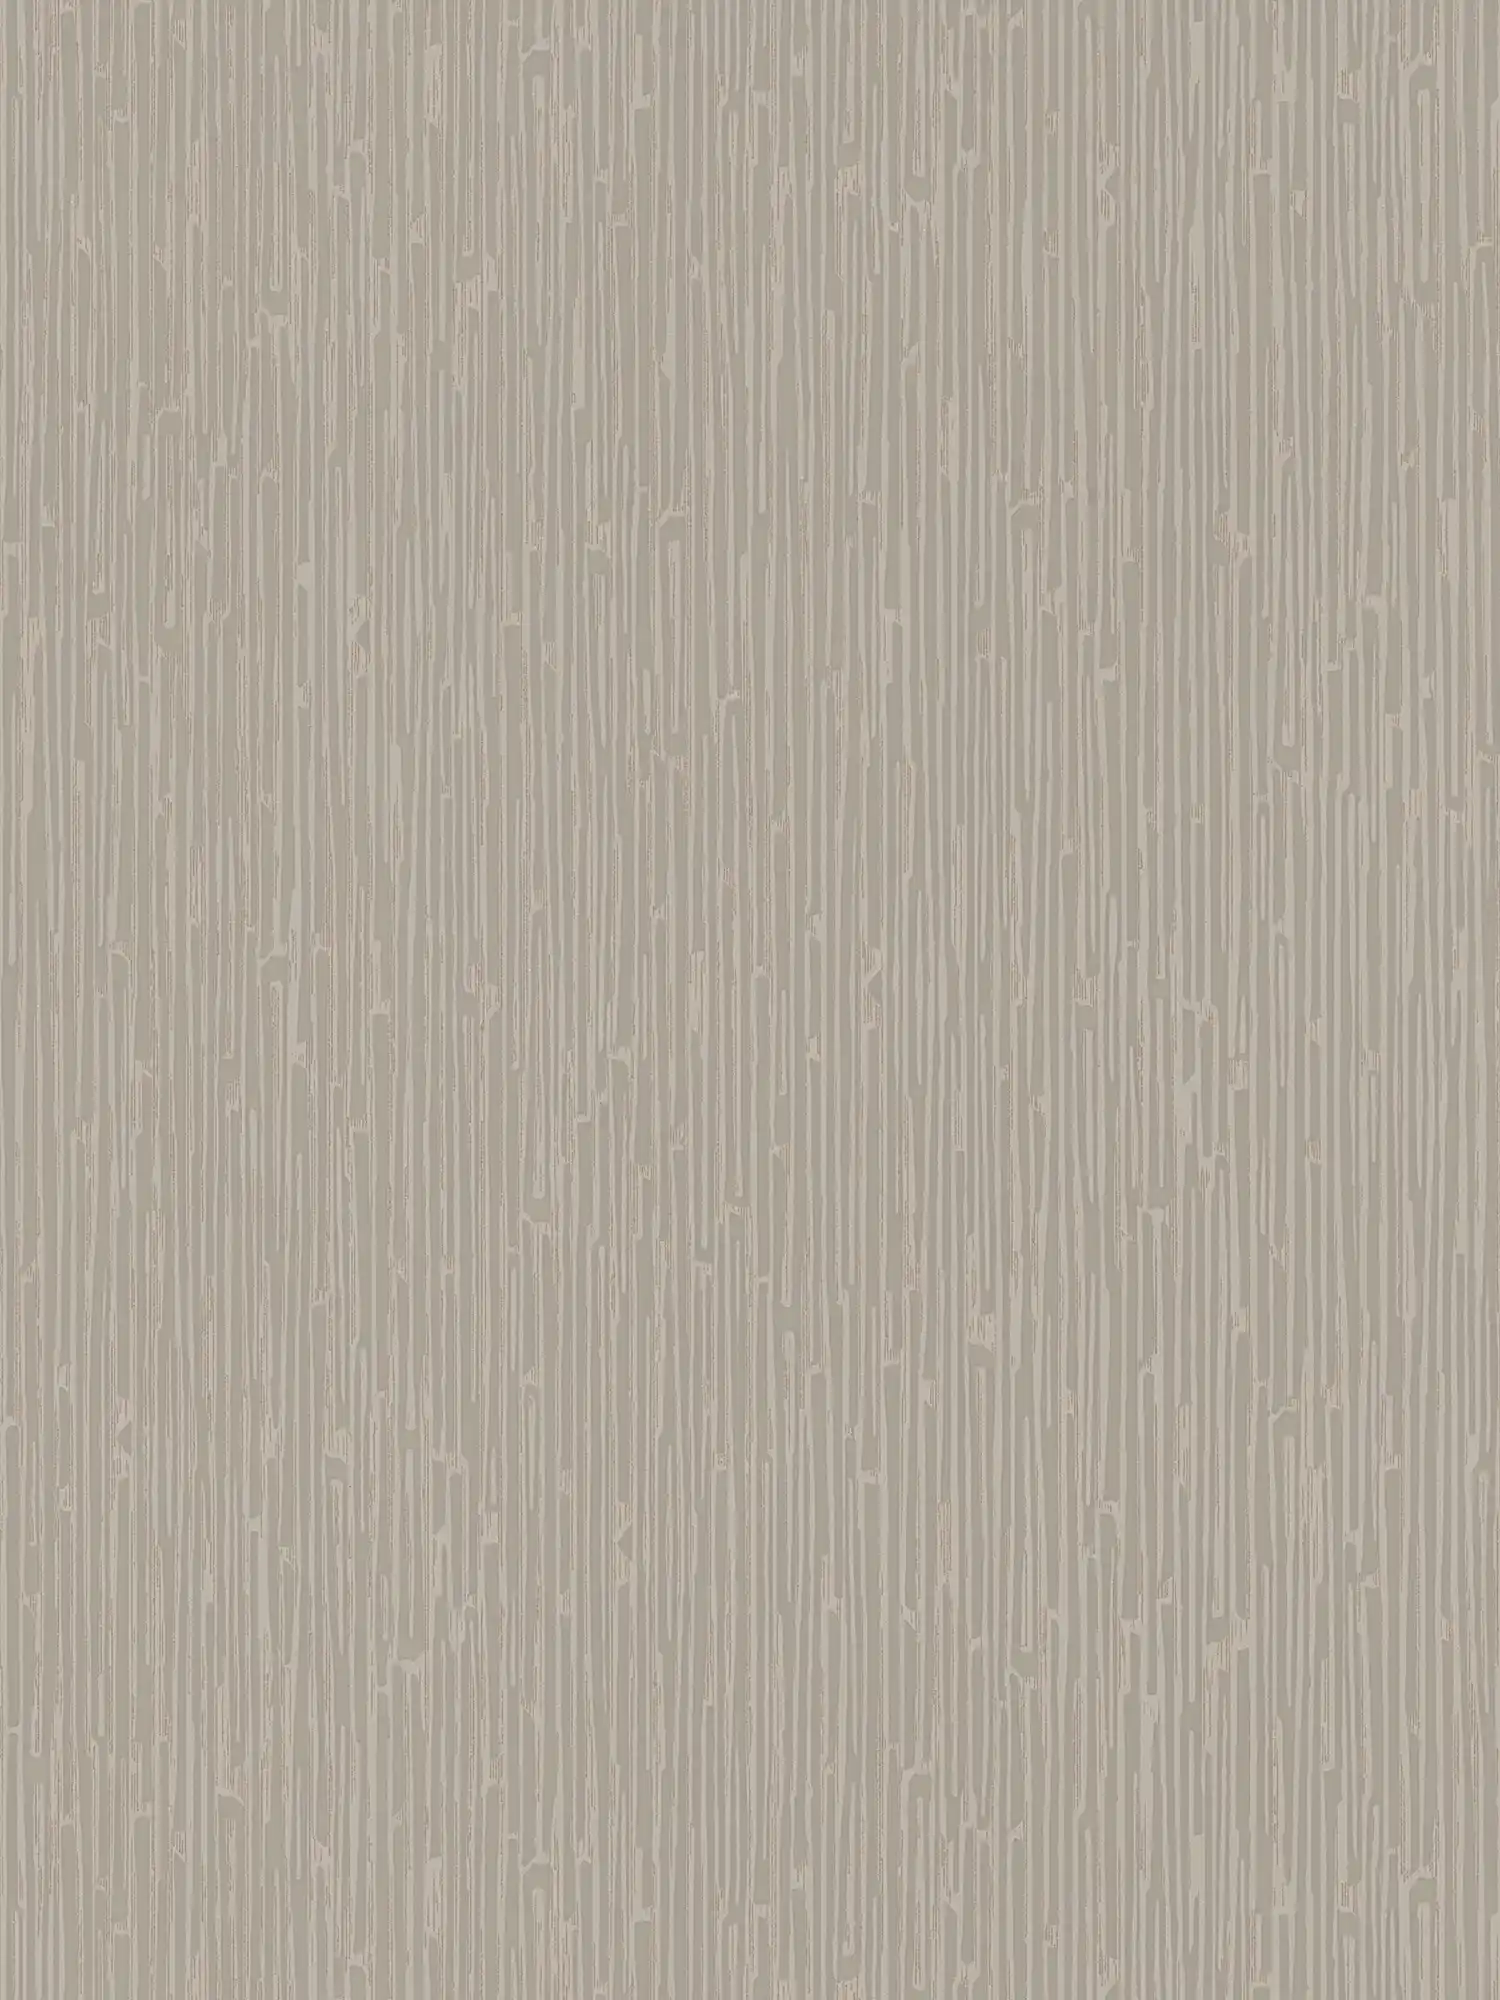 Non-woven wallpaper taupe with tone-on-tone texture effect
